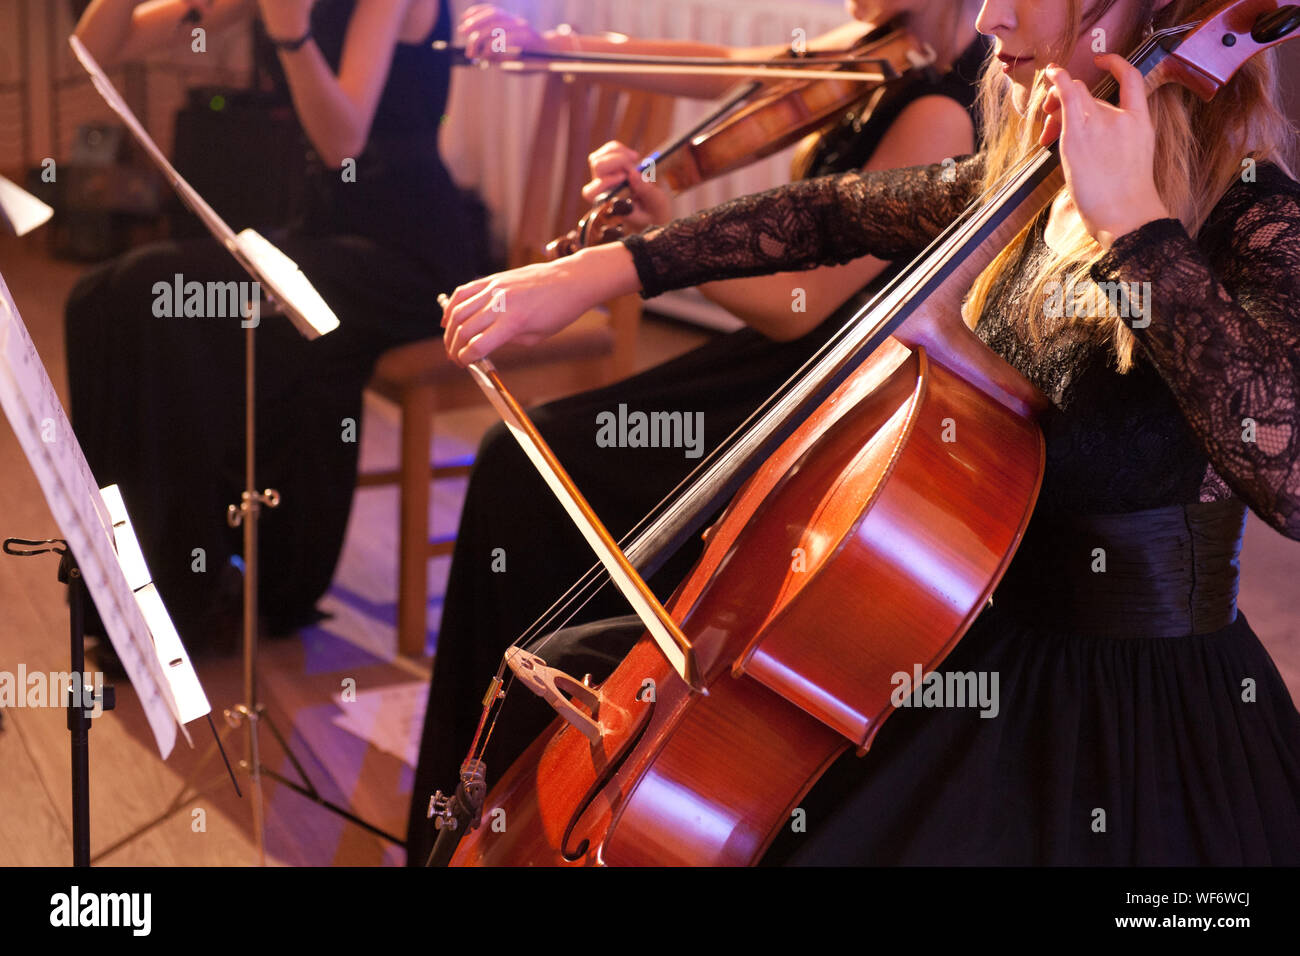 View Of Women Playing String Instruments Stock Photo